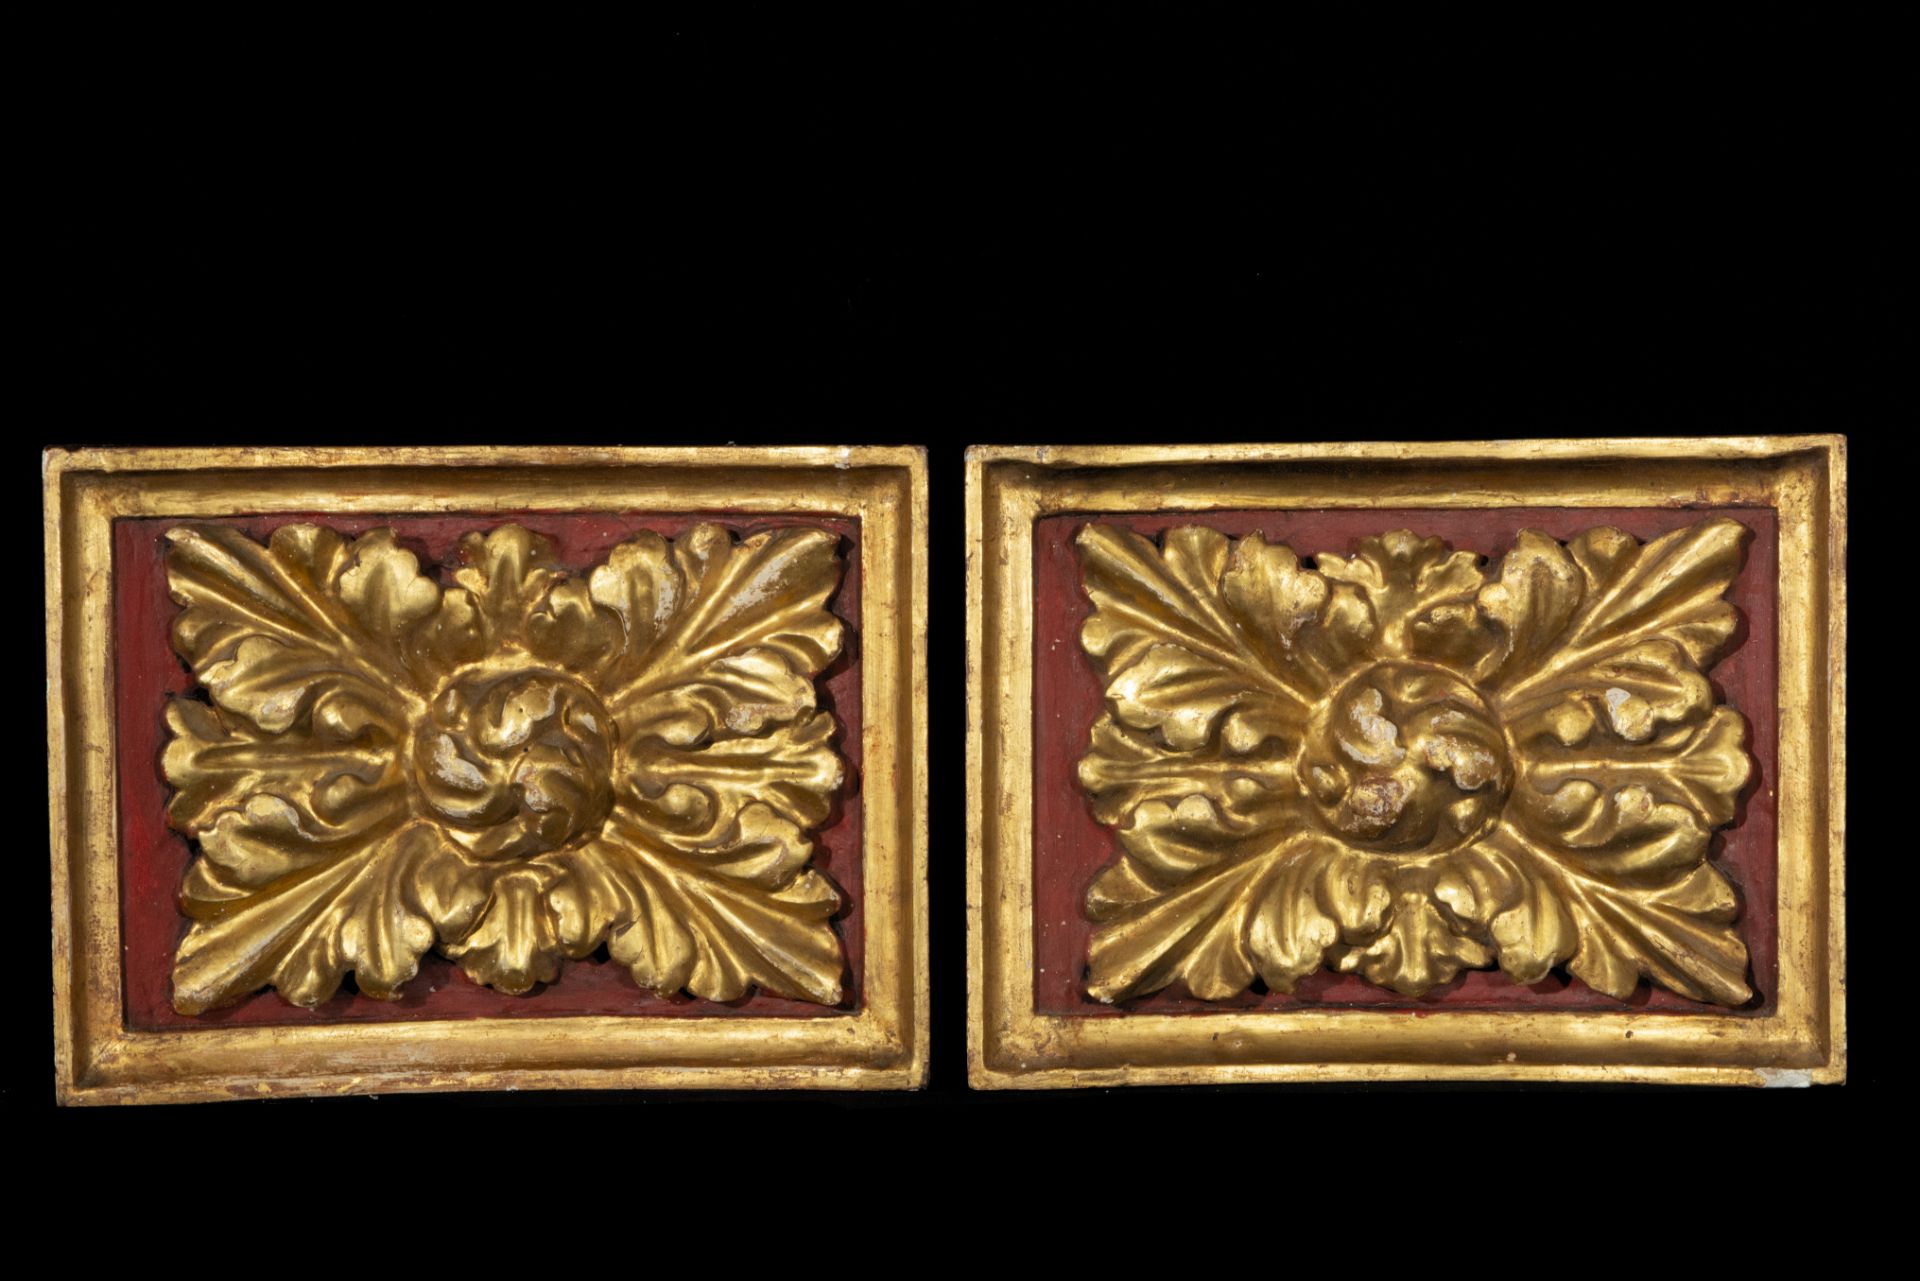 Pair of coffered ceiling elements, 16th century, Renaissance school of Portugal